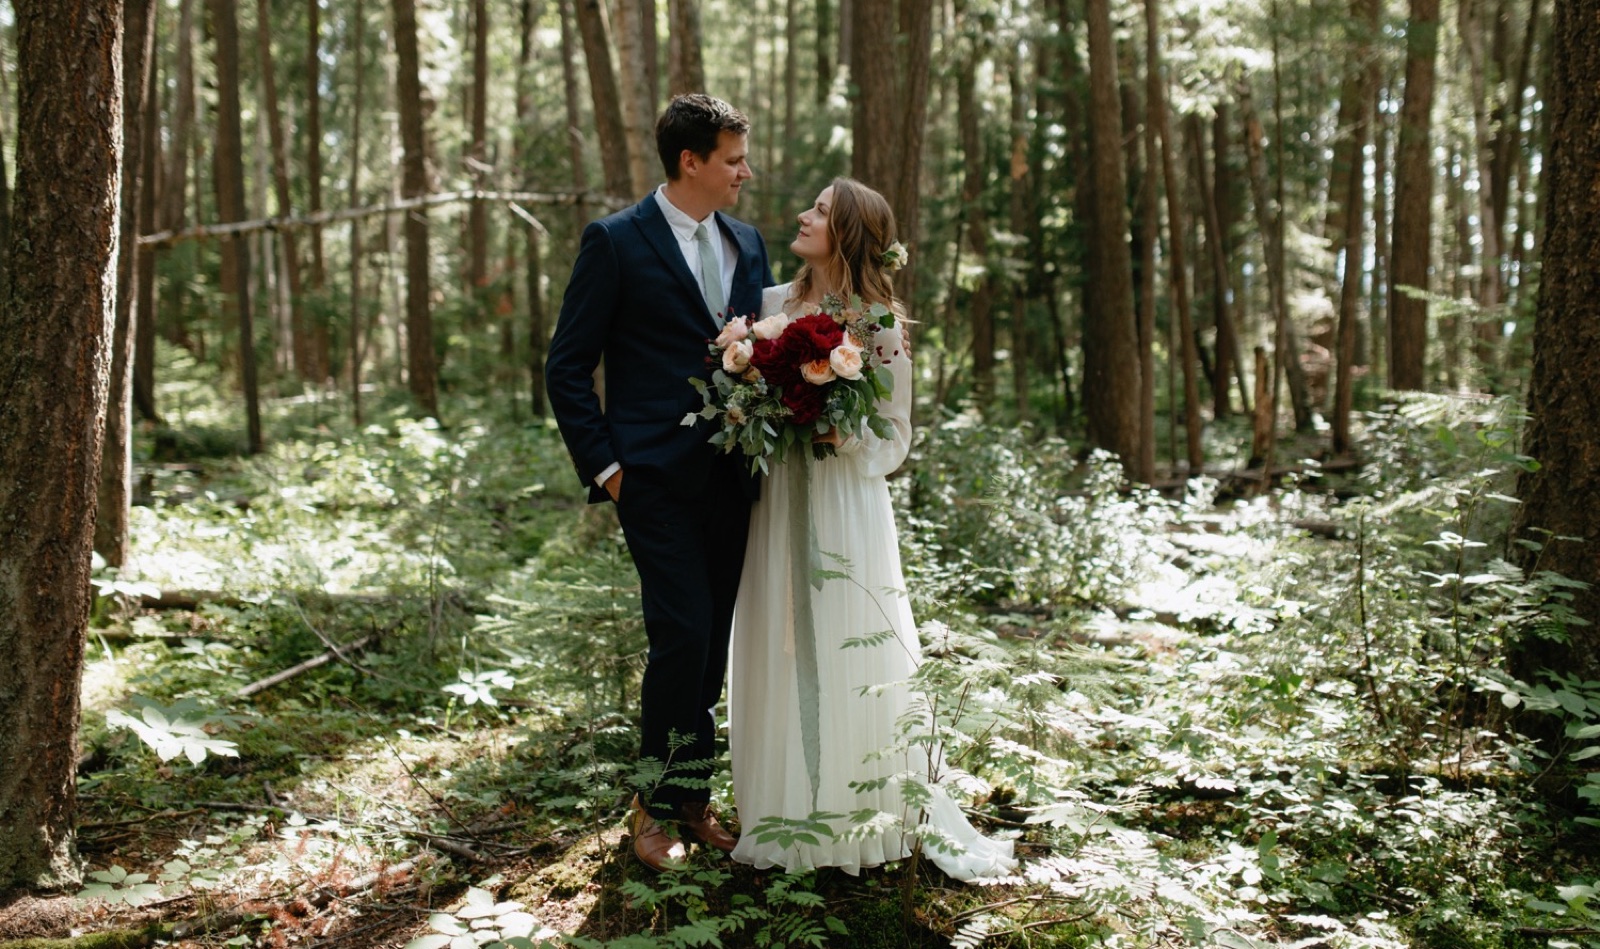 Wedding portraits with colourful maroon florals in LC Gunn Park in Prince George